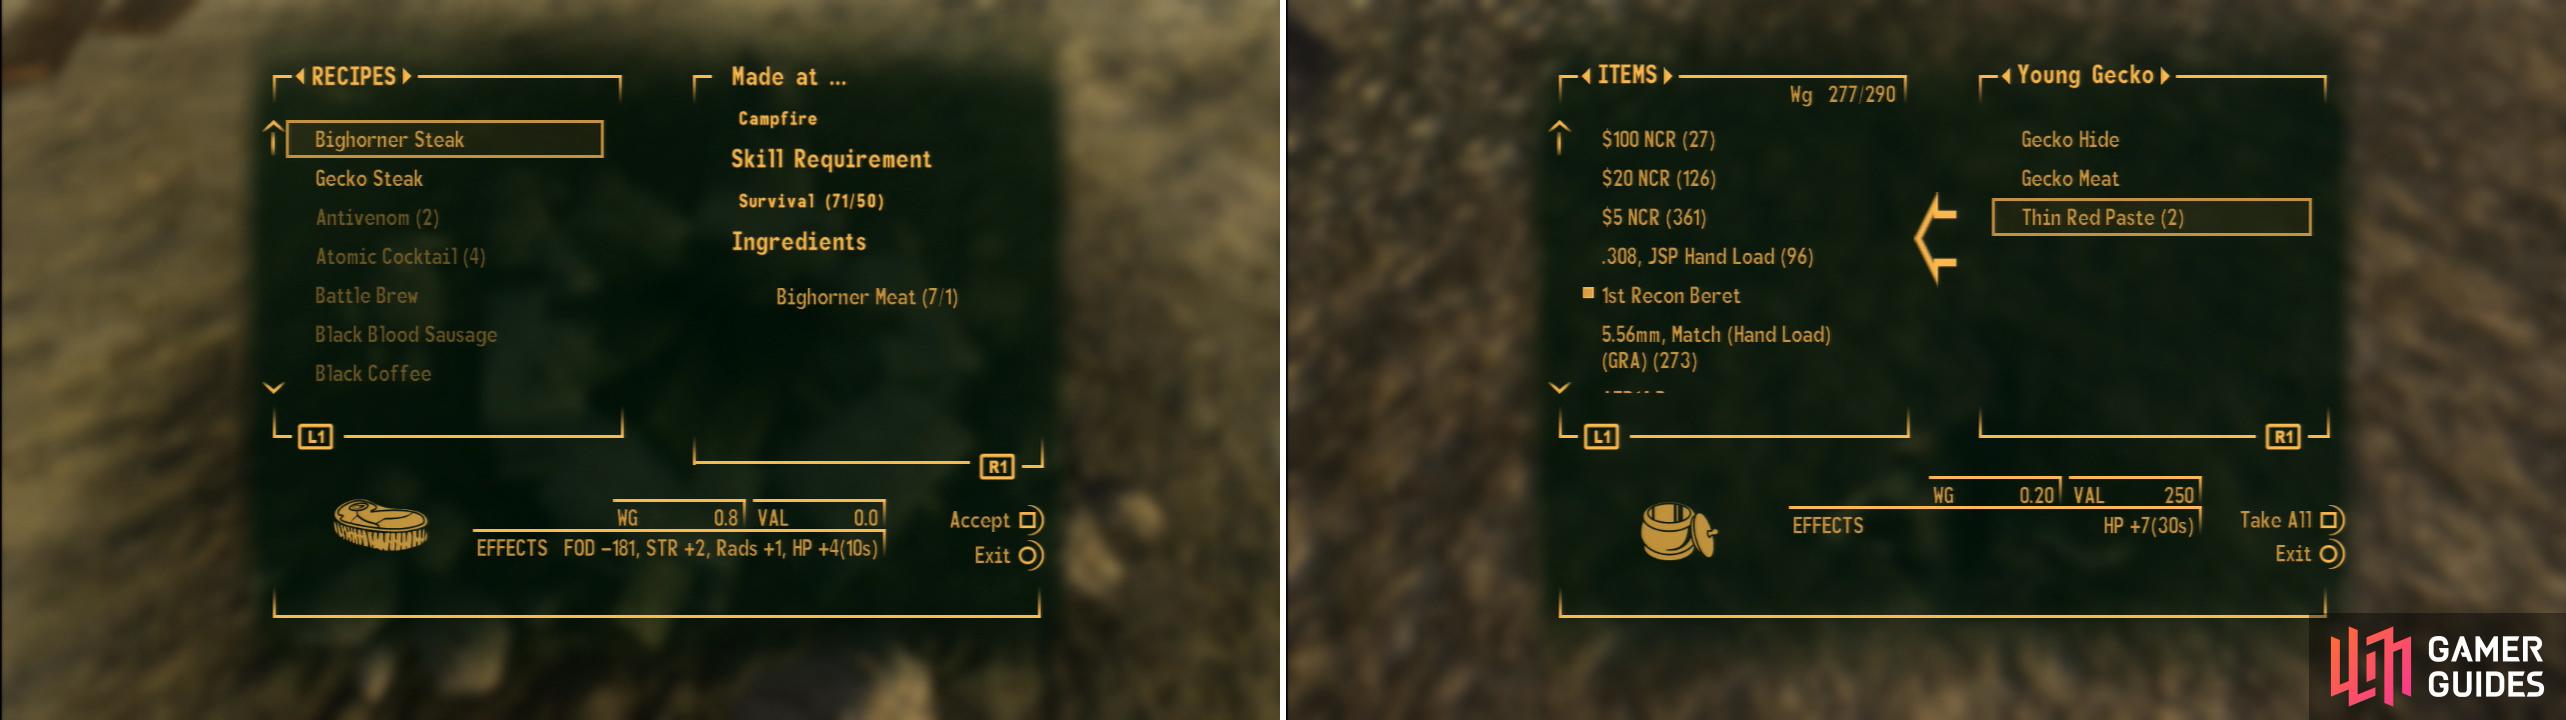 FOD can be obtained from various sources, chiefly by killing tasty critters in the Wasteland. Just remember, food isn’t nearly as beneficial unless it’s been cooked (left). Once you hit level 20 you can pick the Them’s Good Eatin’ perk to get exceptional healing items from creatures you kill (right).